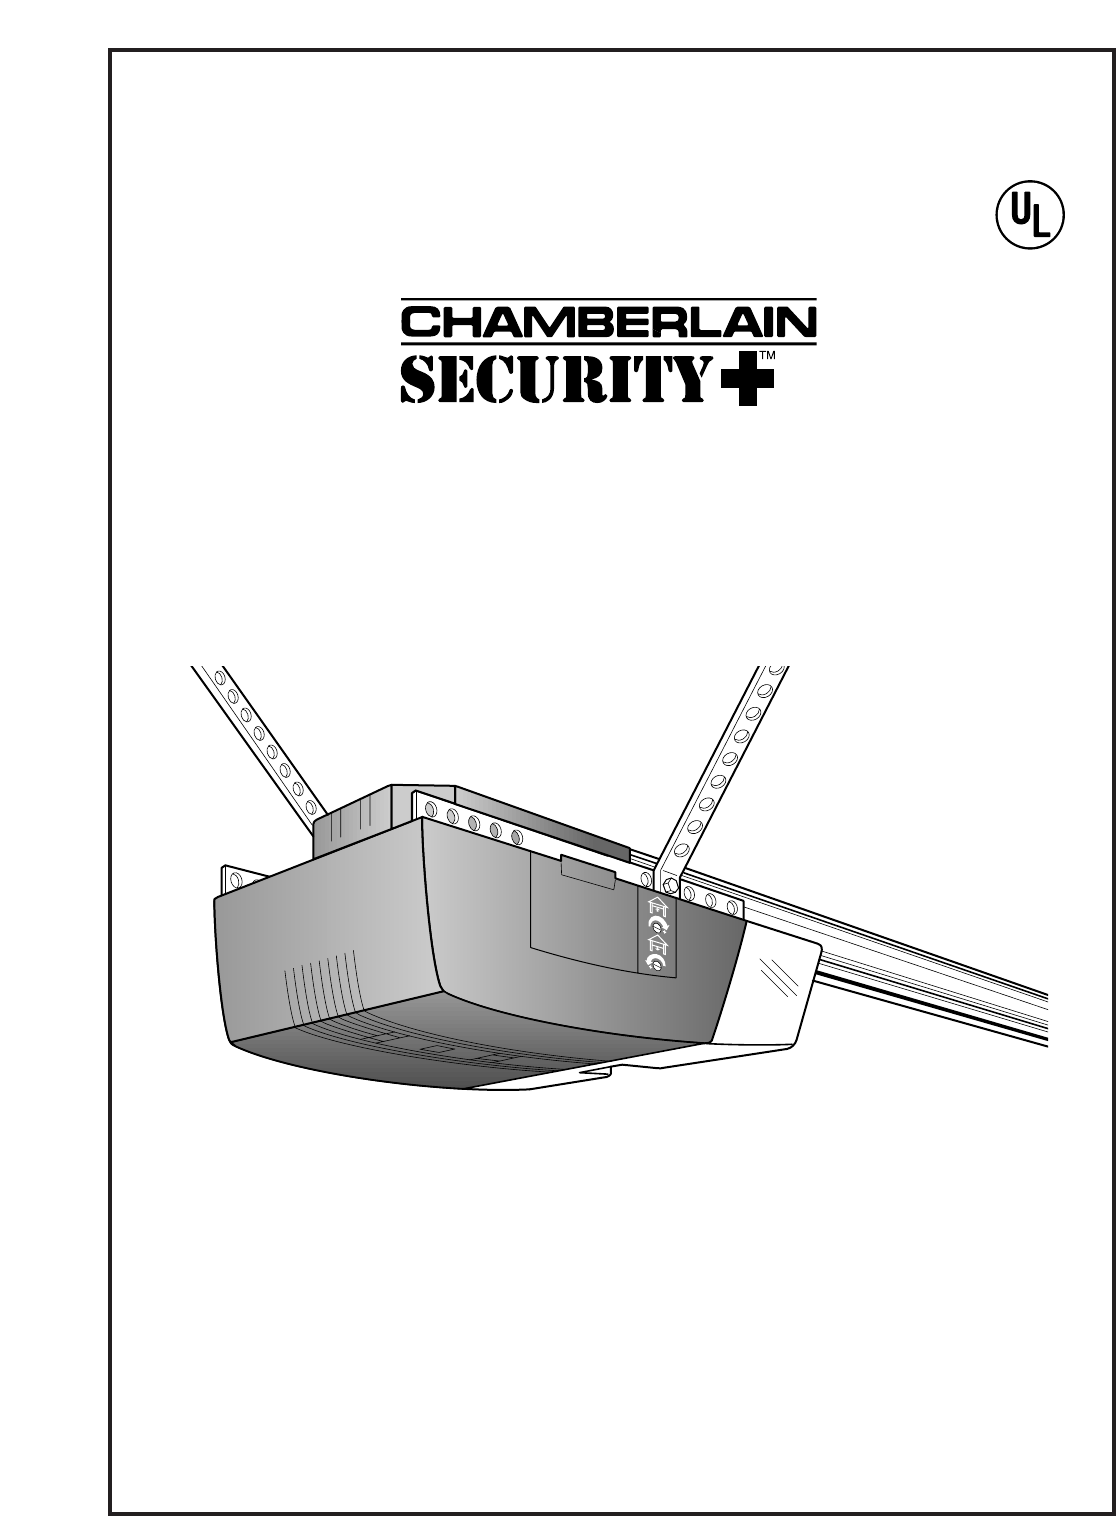 Chamberlain Home Security System 4620 User Guide | ManualsOnline.com  Chamberlain 4620 Lighting Wiring Diagram    Household Appliance Manuals - Manuals Online